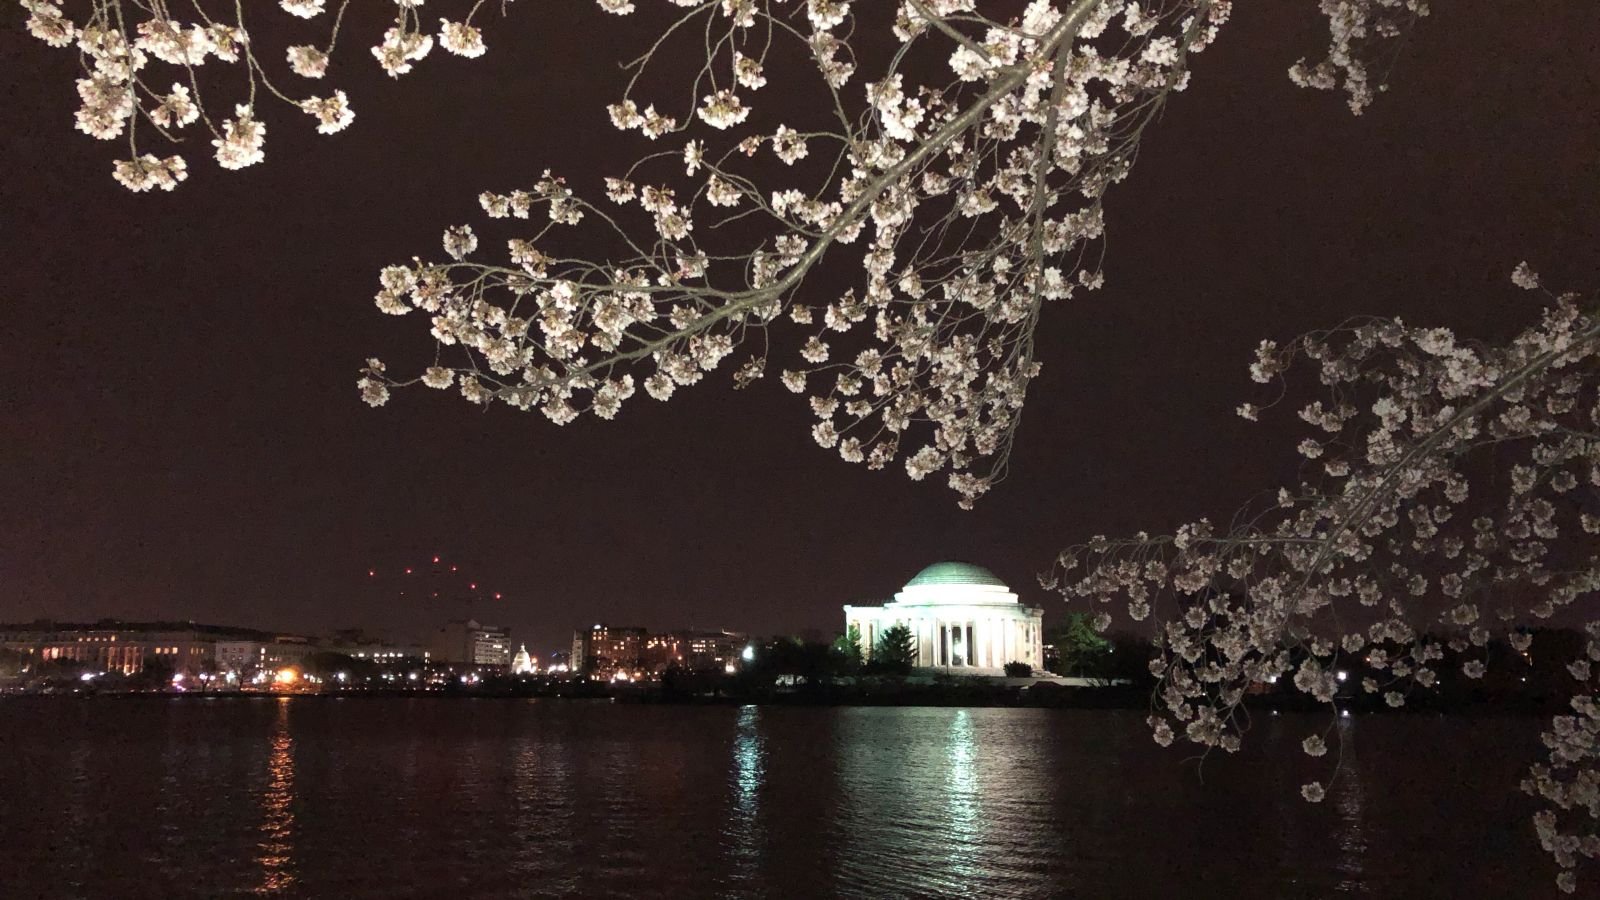 Nighttime photo of the Washington, DC Tidal Basin and Jefferson Memorial framed by blossoming cherry tree branches